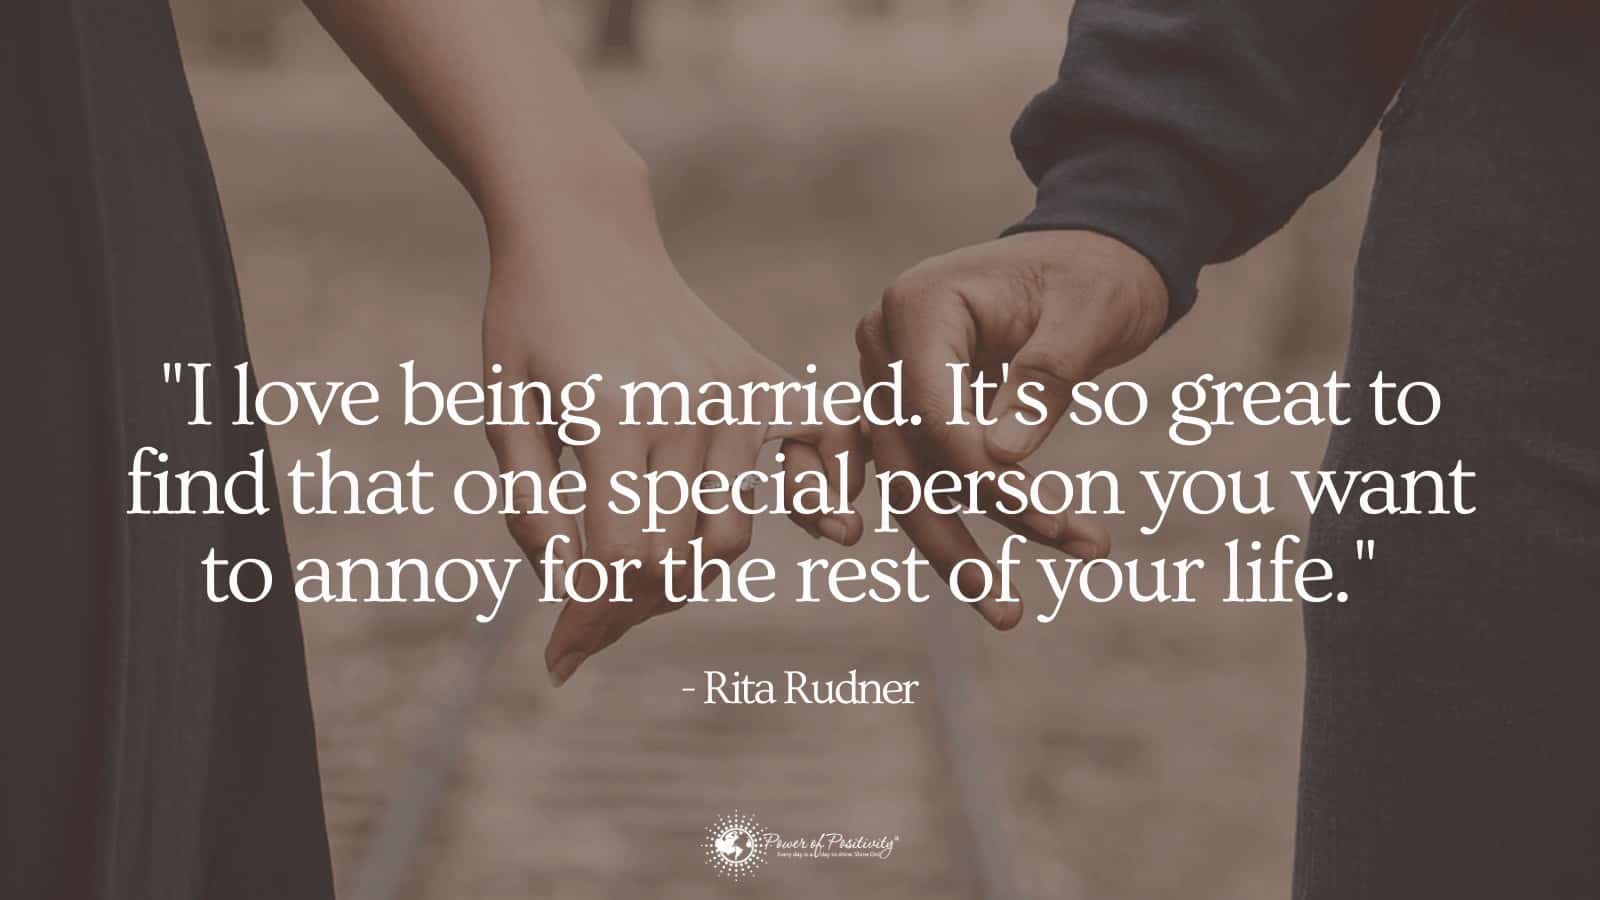 15 Humorous Quotes on Marriage